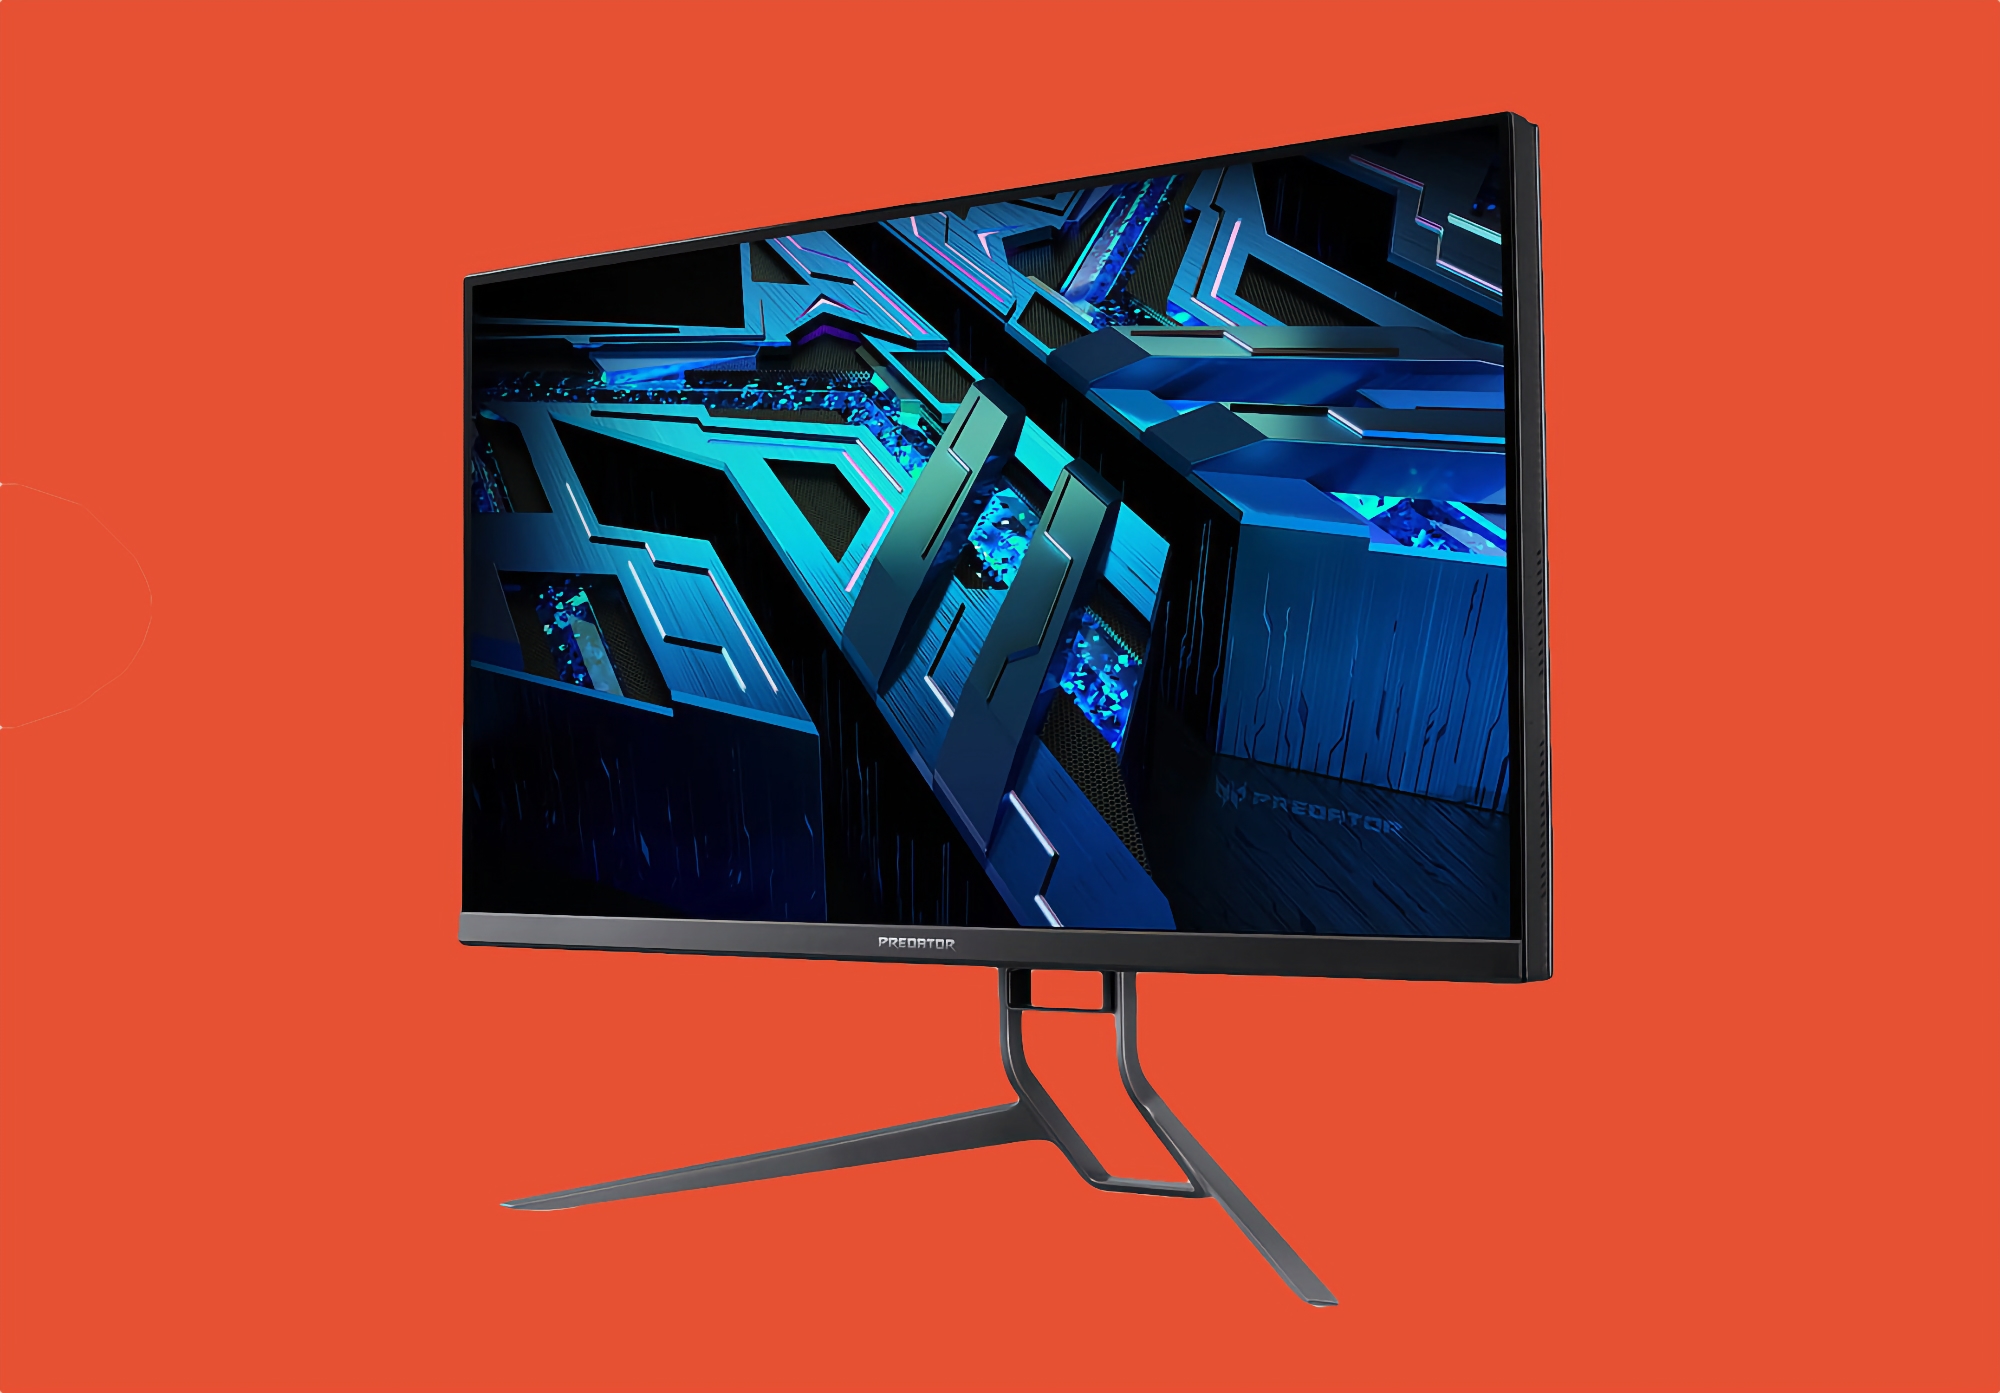 Acer to launch new Predator gaming monitor with 4K screen at 165Hz